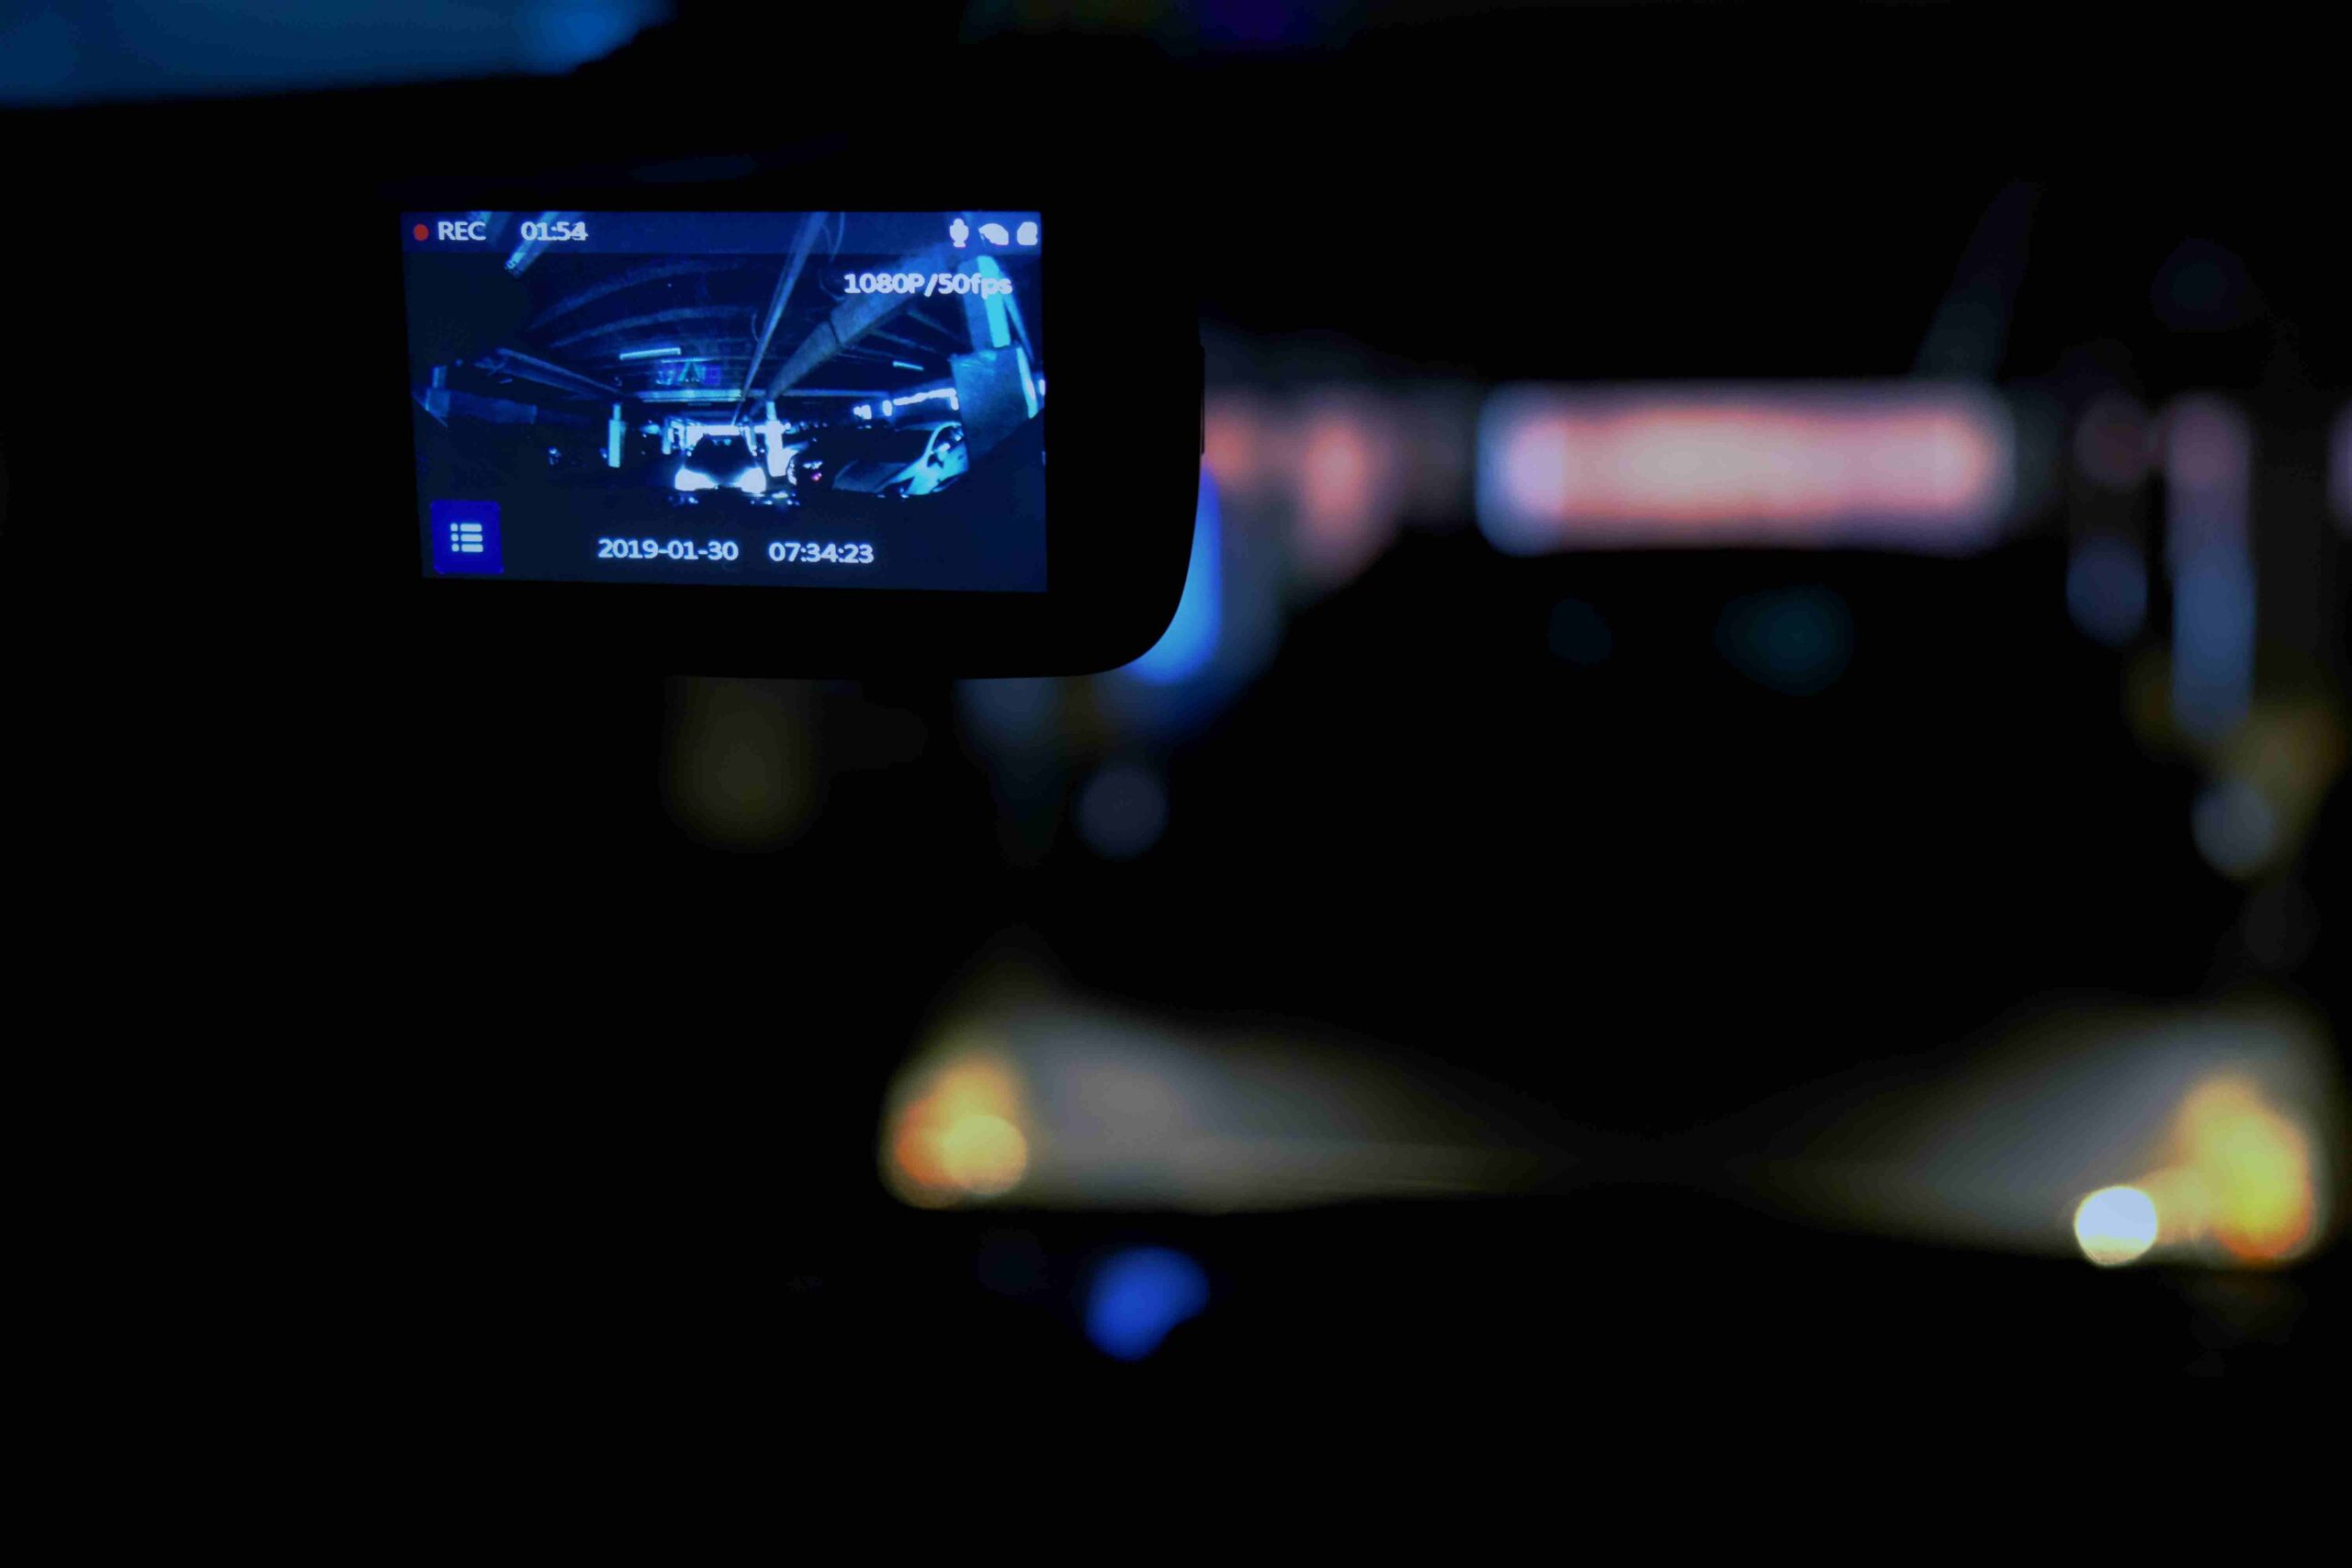 Can Dash Cam Footage Help With Personal Injury Claim?